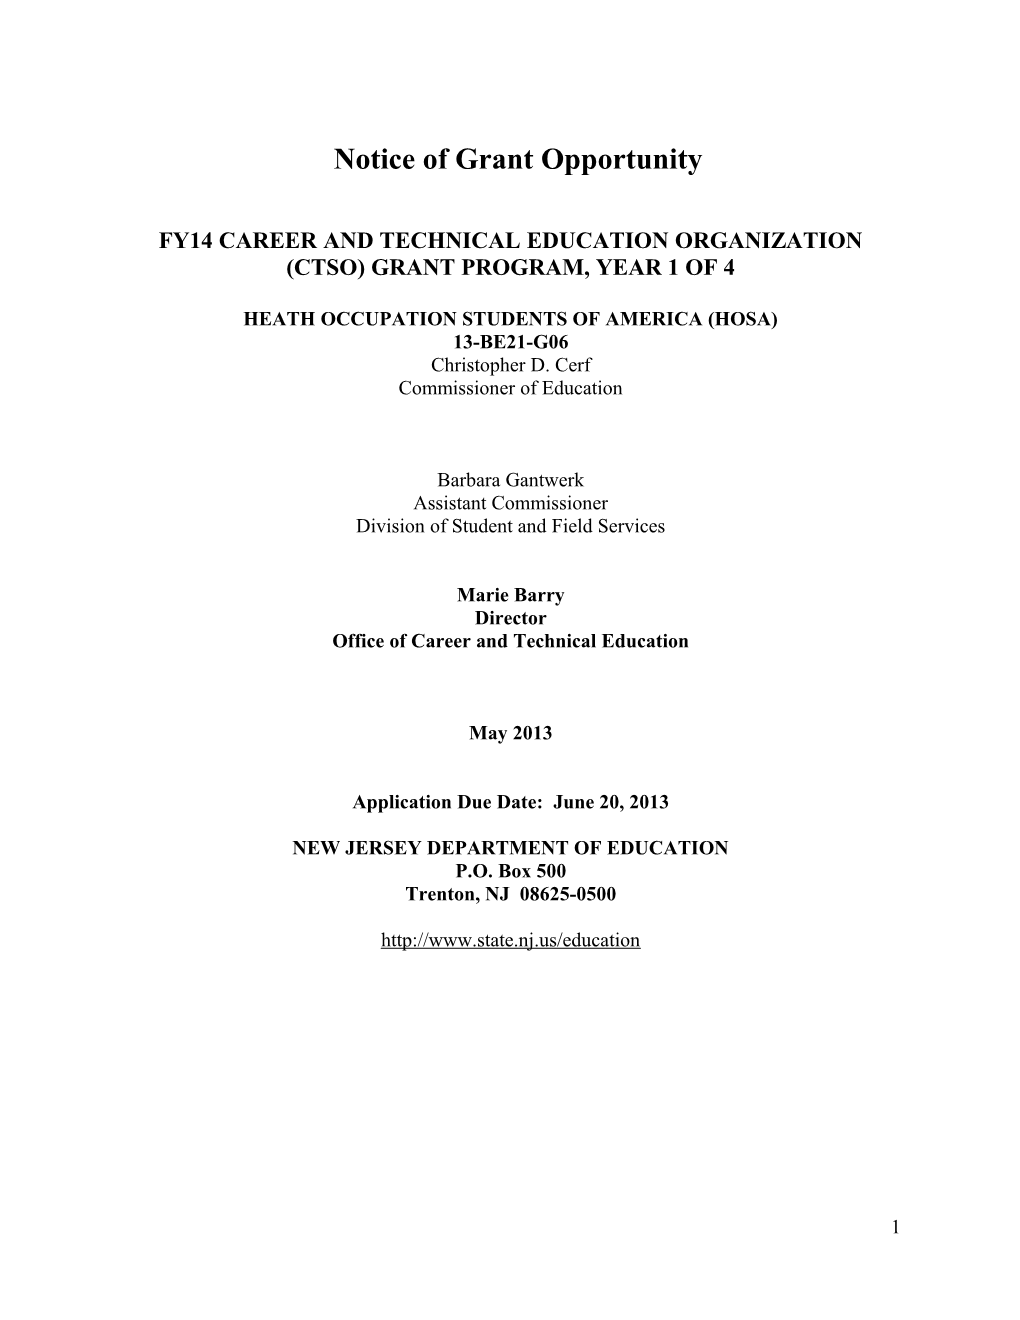 FY14 CAREER and TECHNICAL EDUCATION ORGANIZATION (Ctso) GRANT PROGRAM, Year 1 of 4